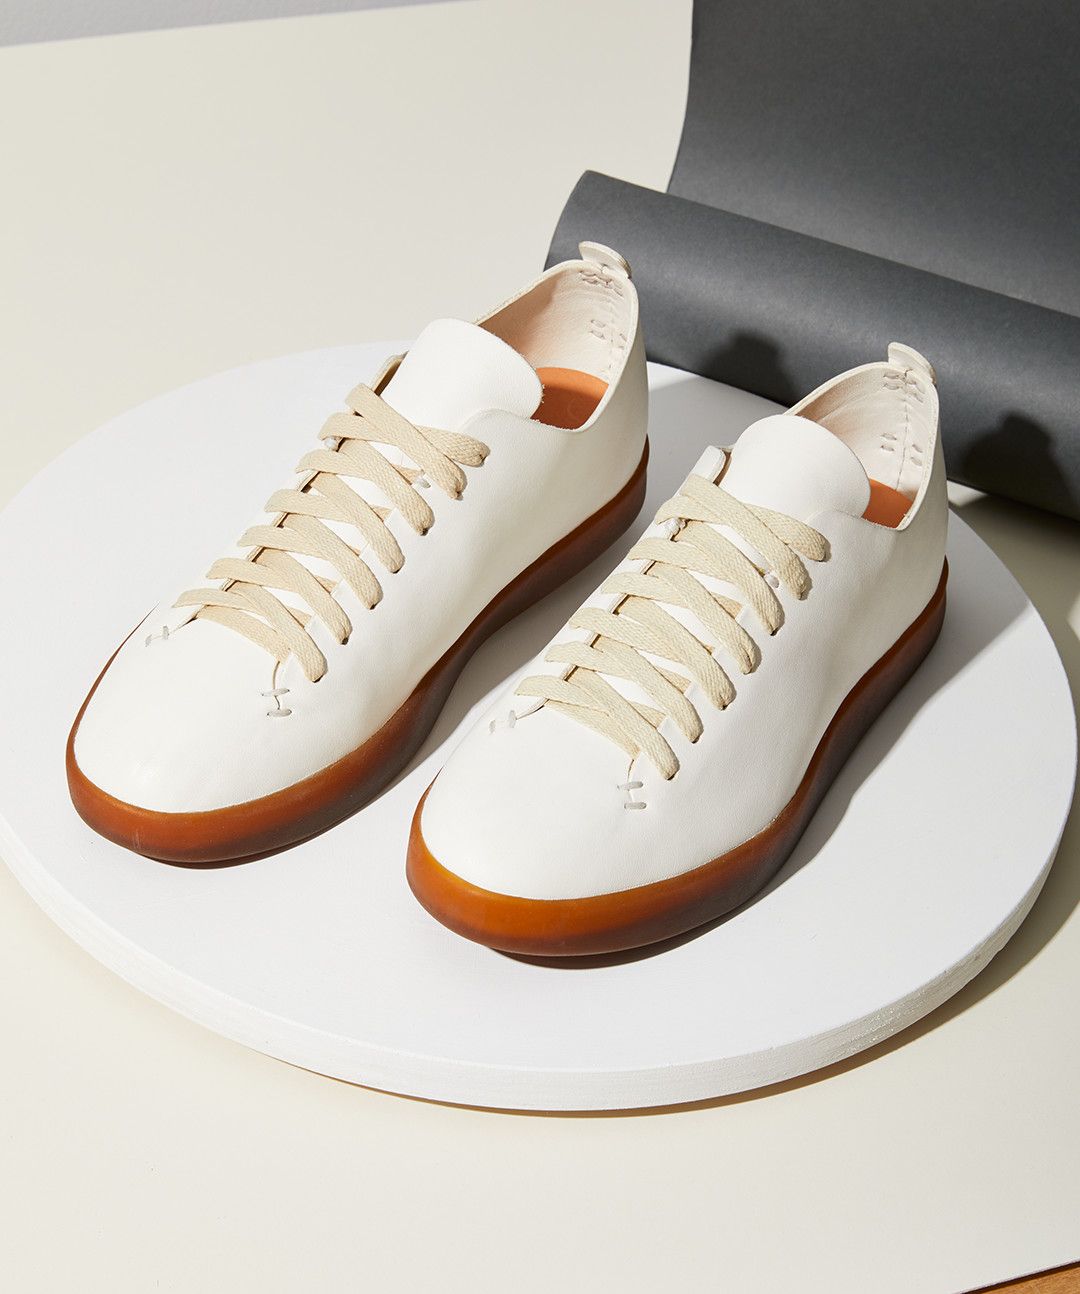 Rubin Bliver til prosa The Sneakers That Are Built to Last Just as Long as Your Dress Shoes